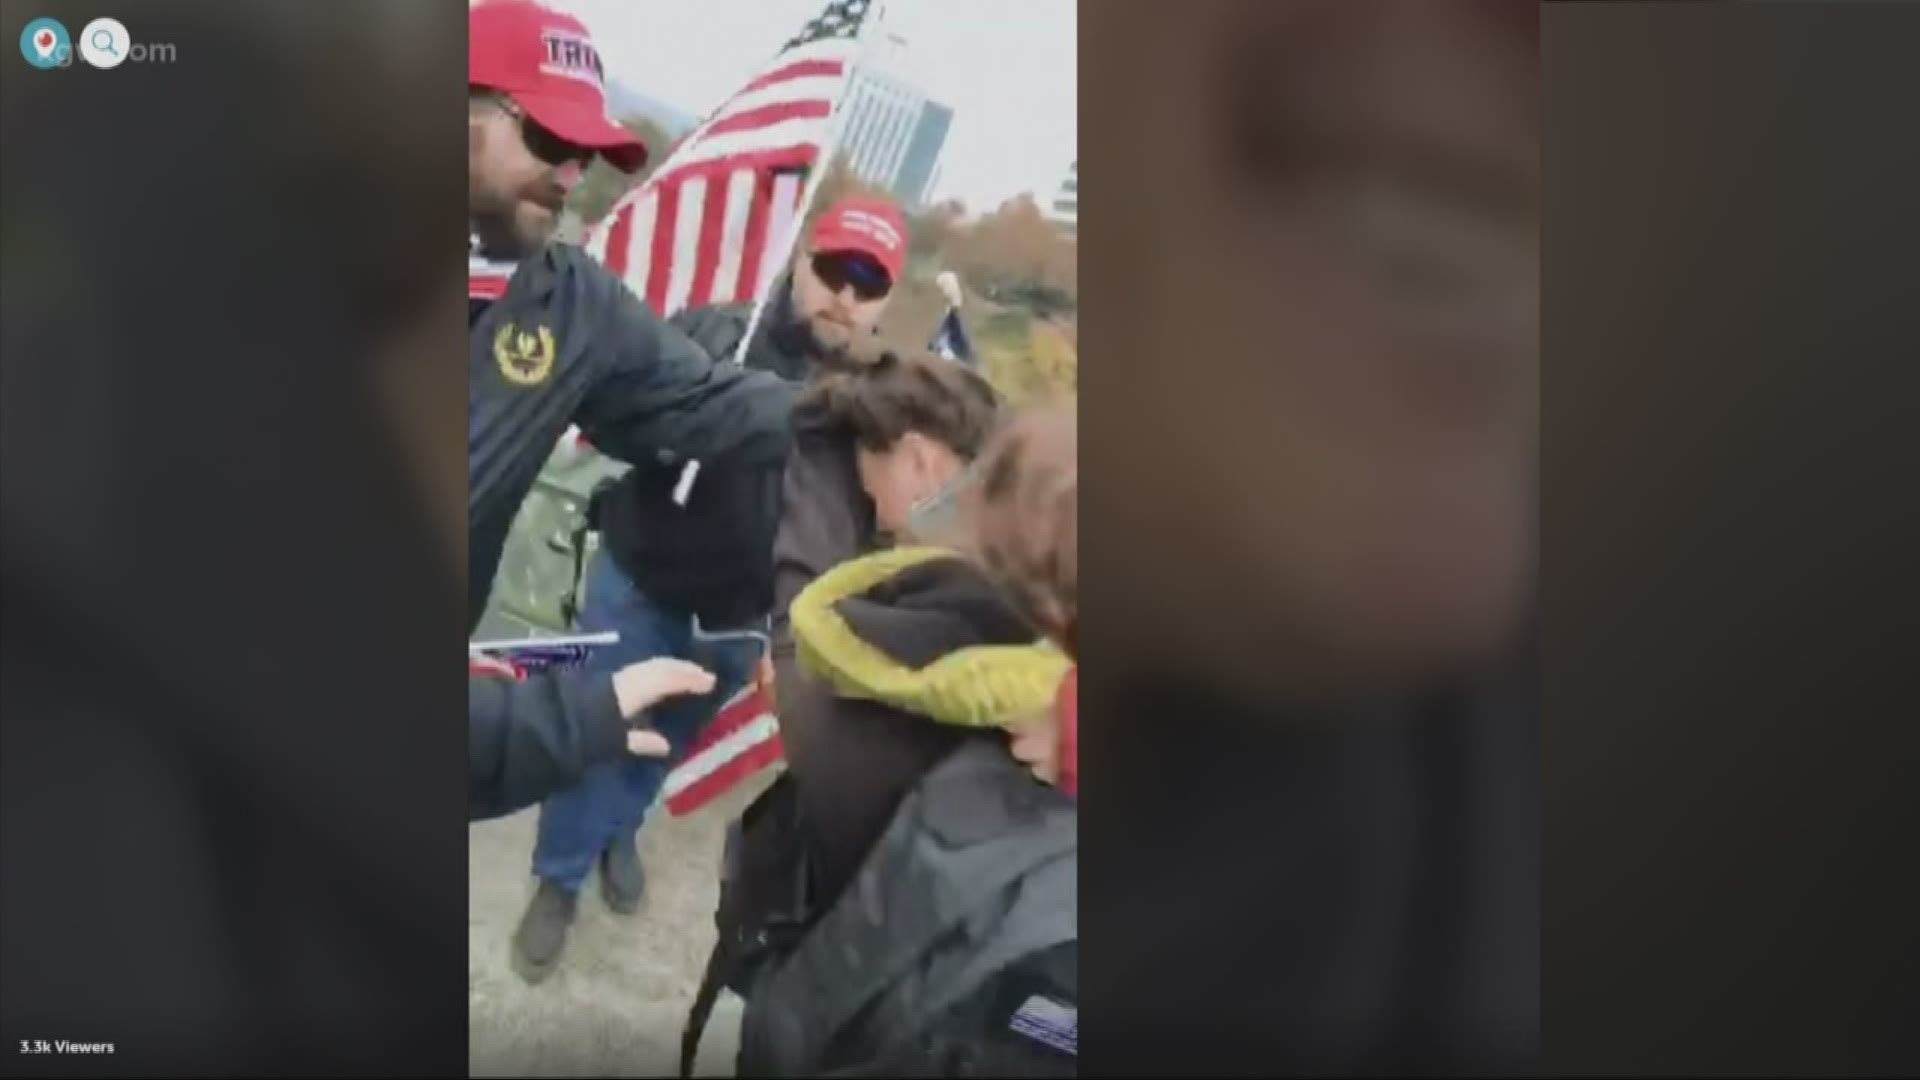 A video out of NE Portland is getting a lot of attention online. It shows a fight between a woman and a group wearing symbols for the far-right group the Proud Boys